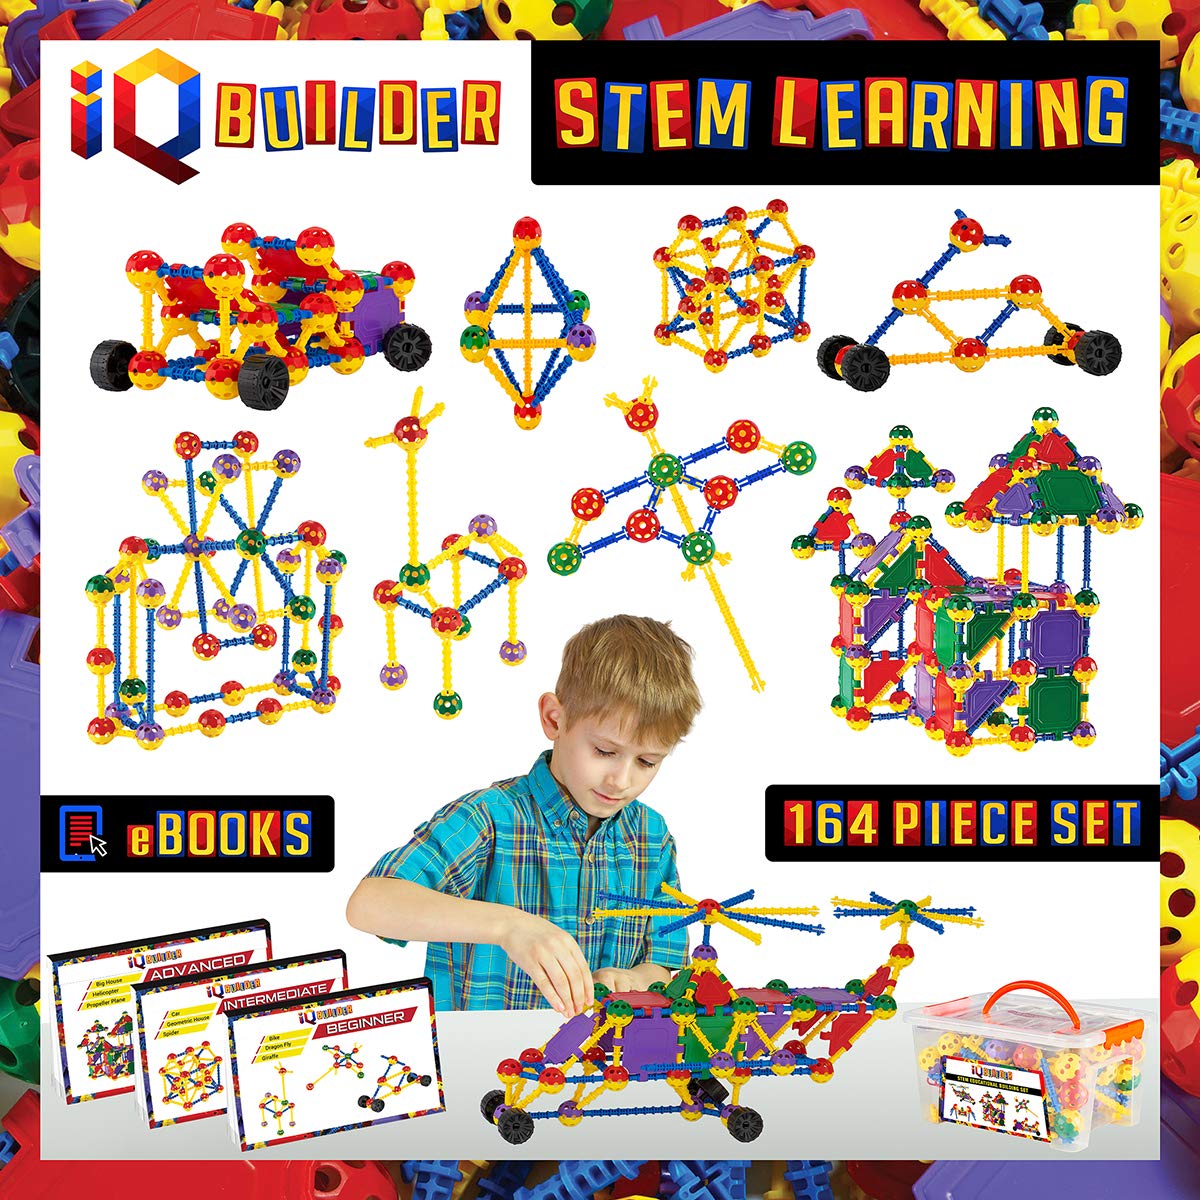 Review of IQ BUILDER | STEM Learning Toys | Creative Construction Engineering